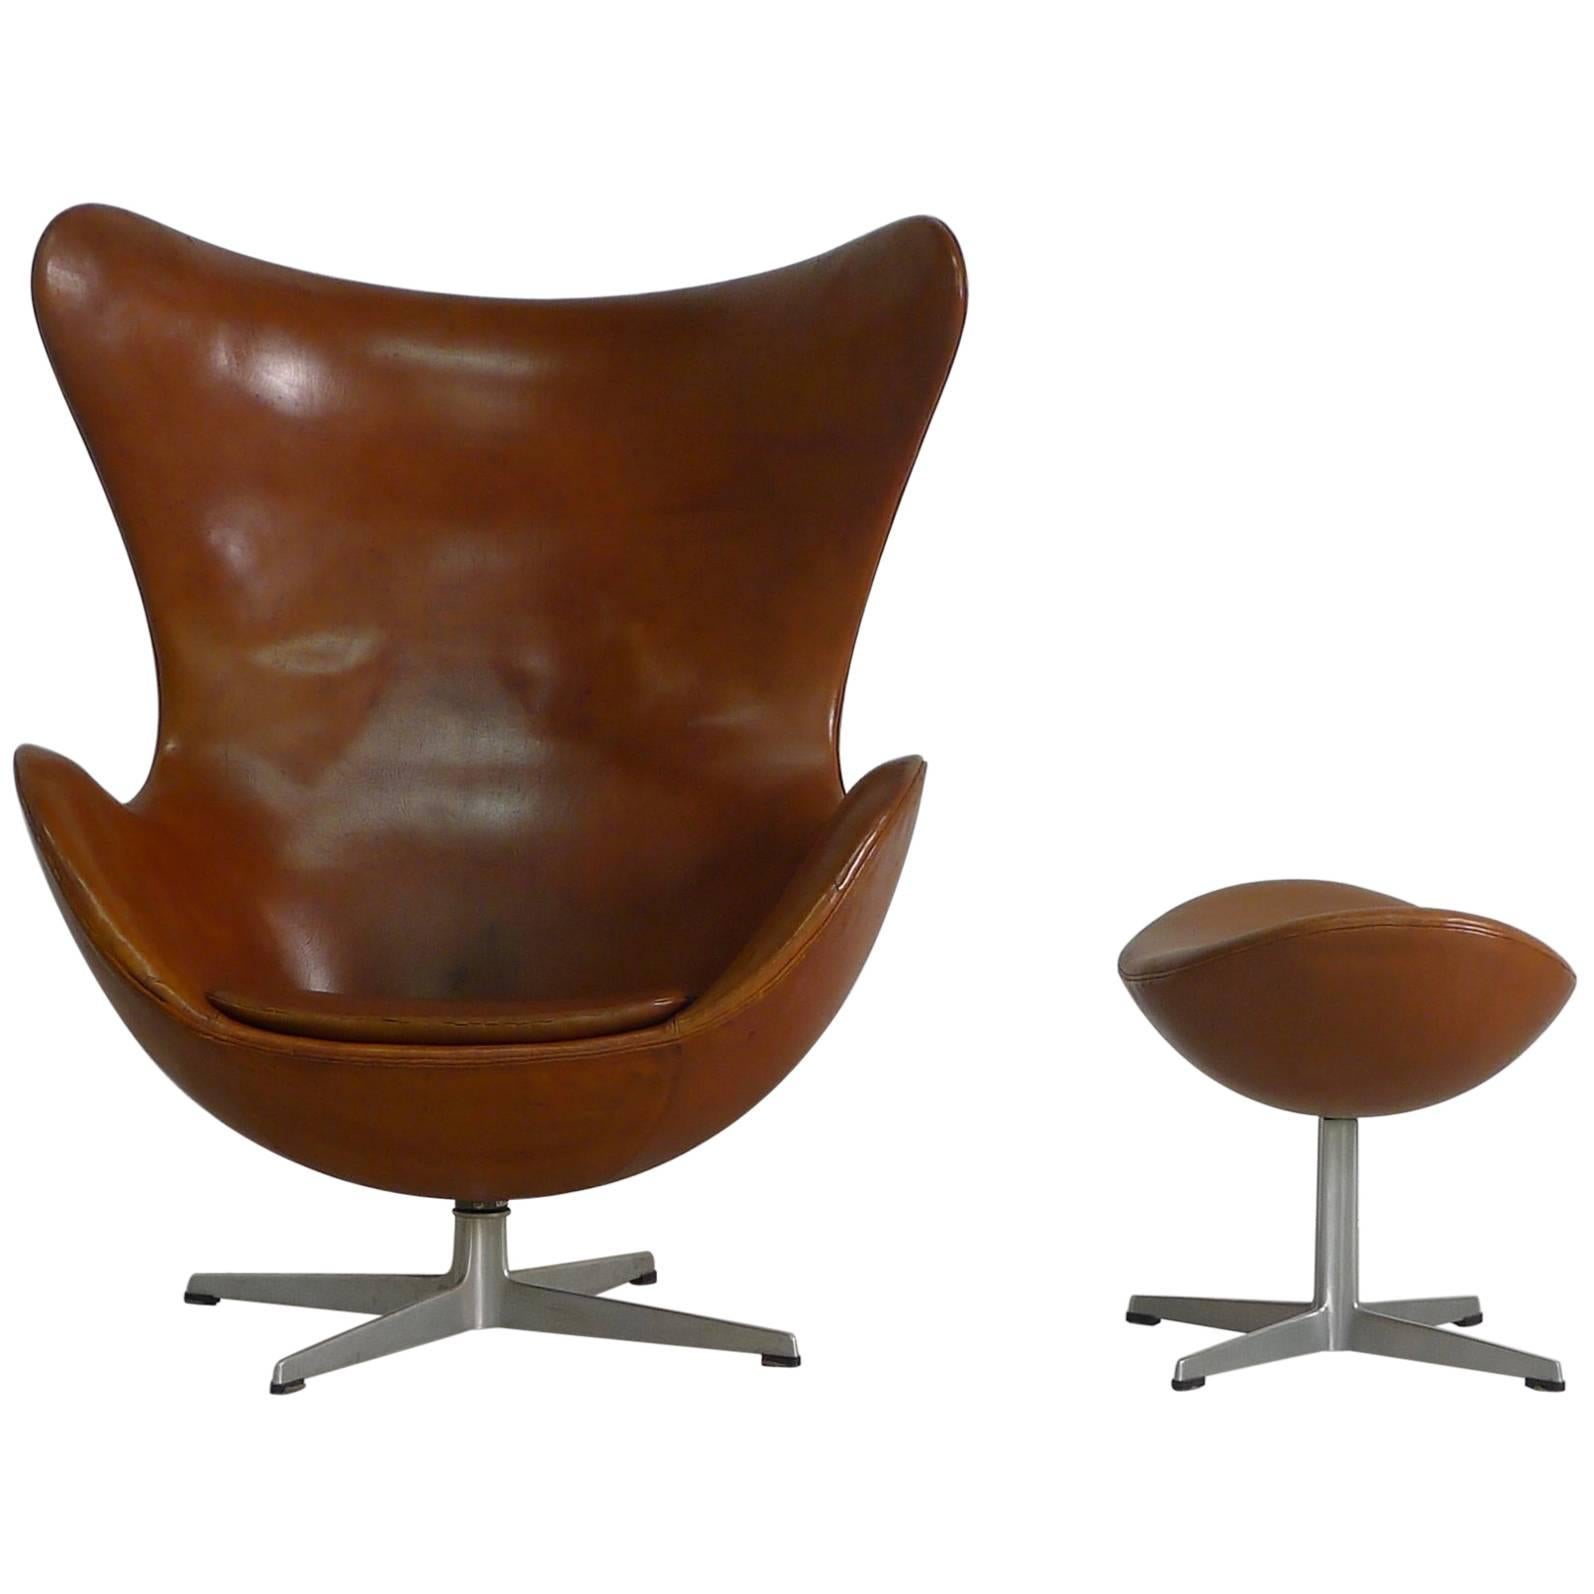 Arne Jacobsen Egg Chair and Ottoman in Original Brown Leather, Danish, 1960s